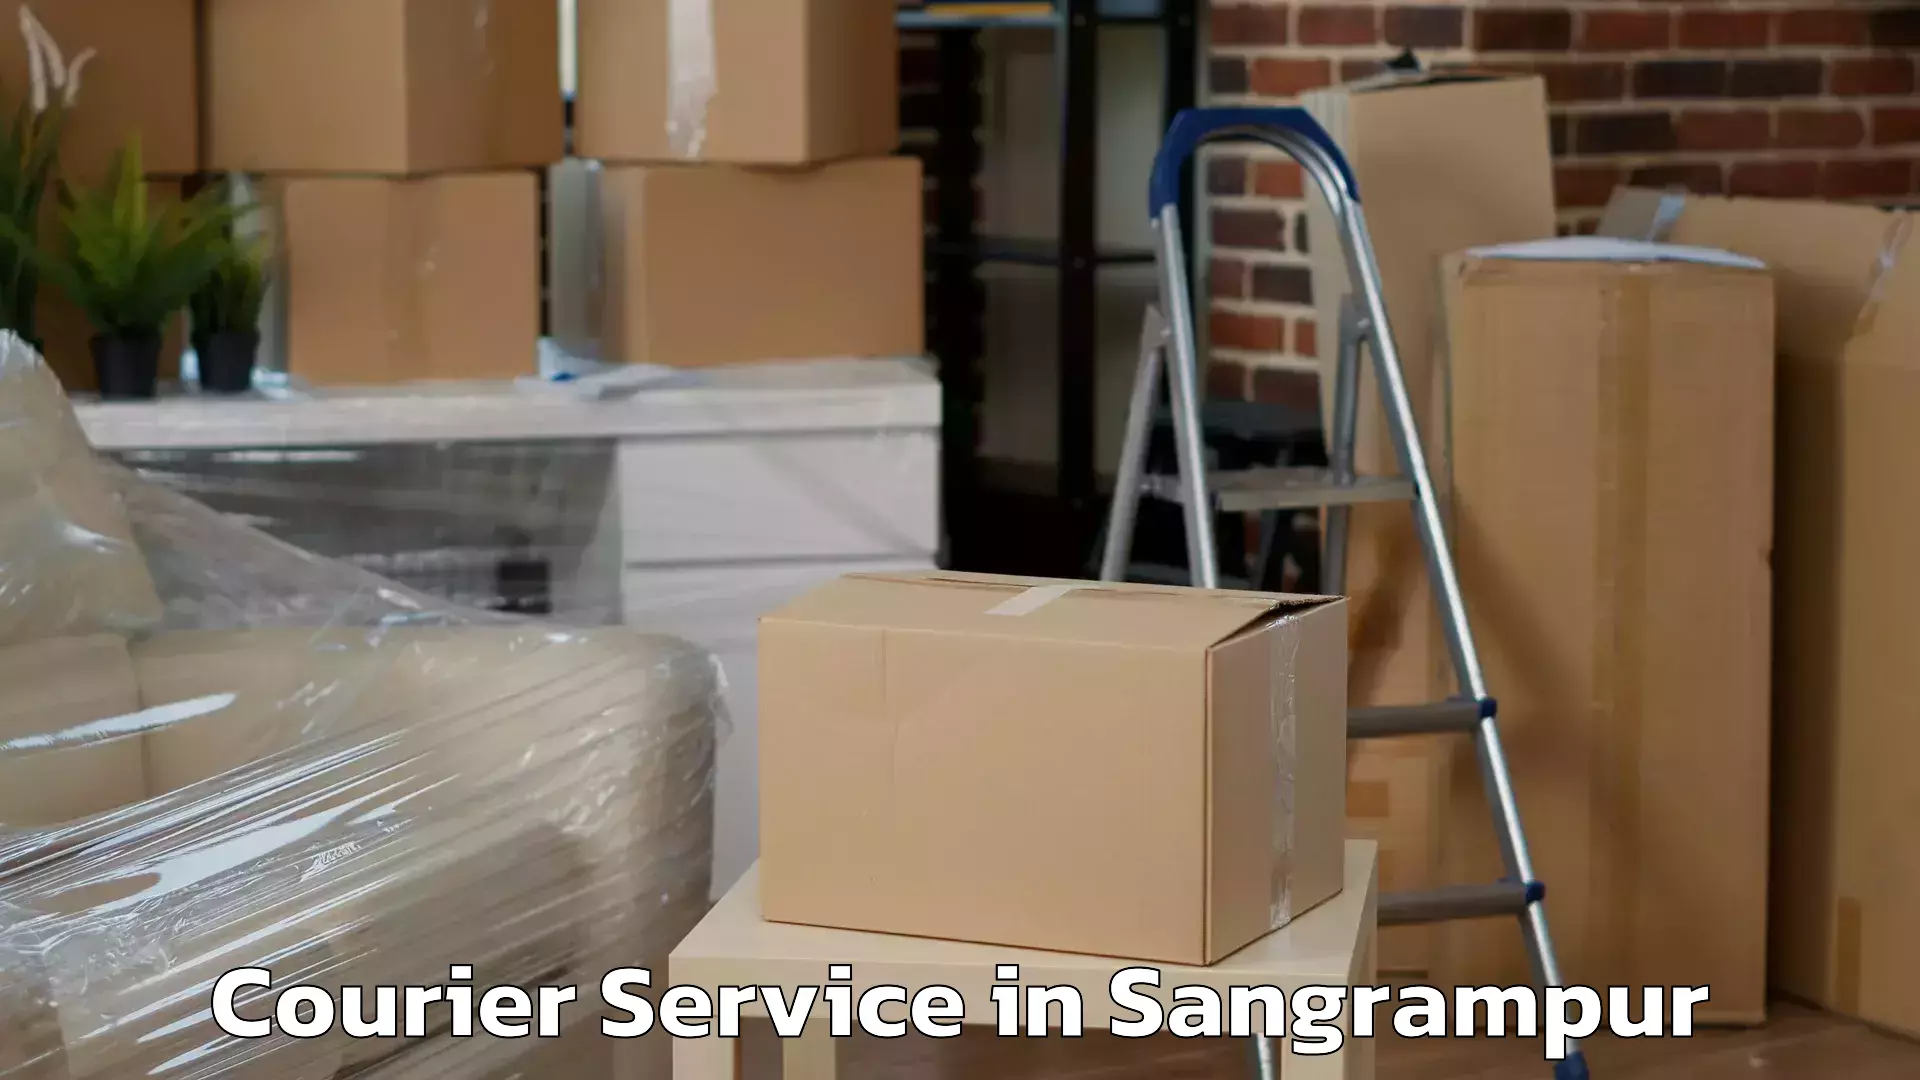 24/7 courier service in Sangrampur